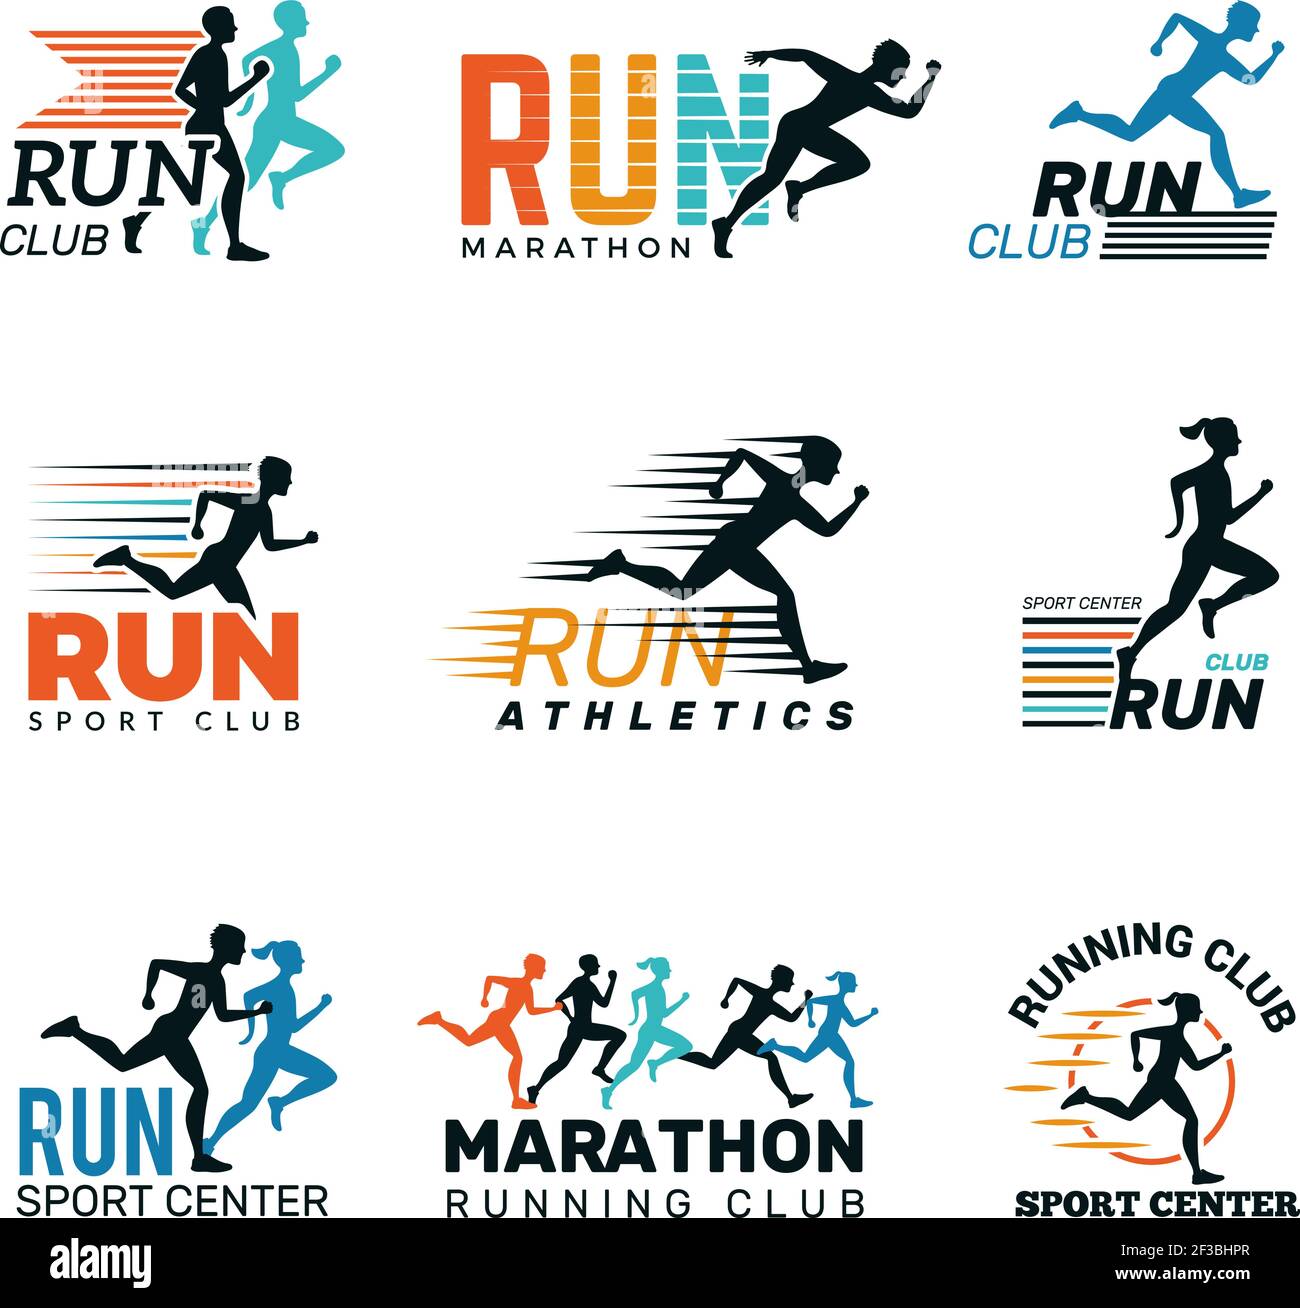 Running logo. Marathon club badges sport symbols shoe and legs jumping running people vector collection Stock Vector